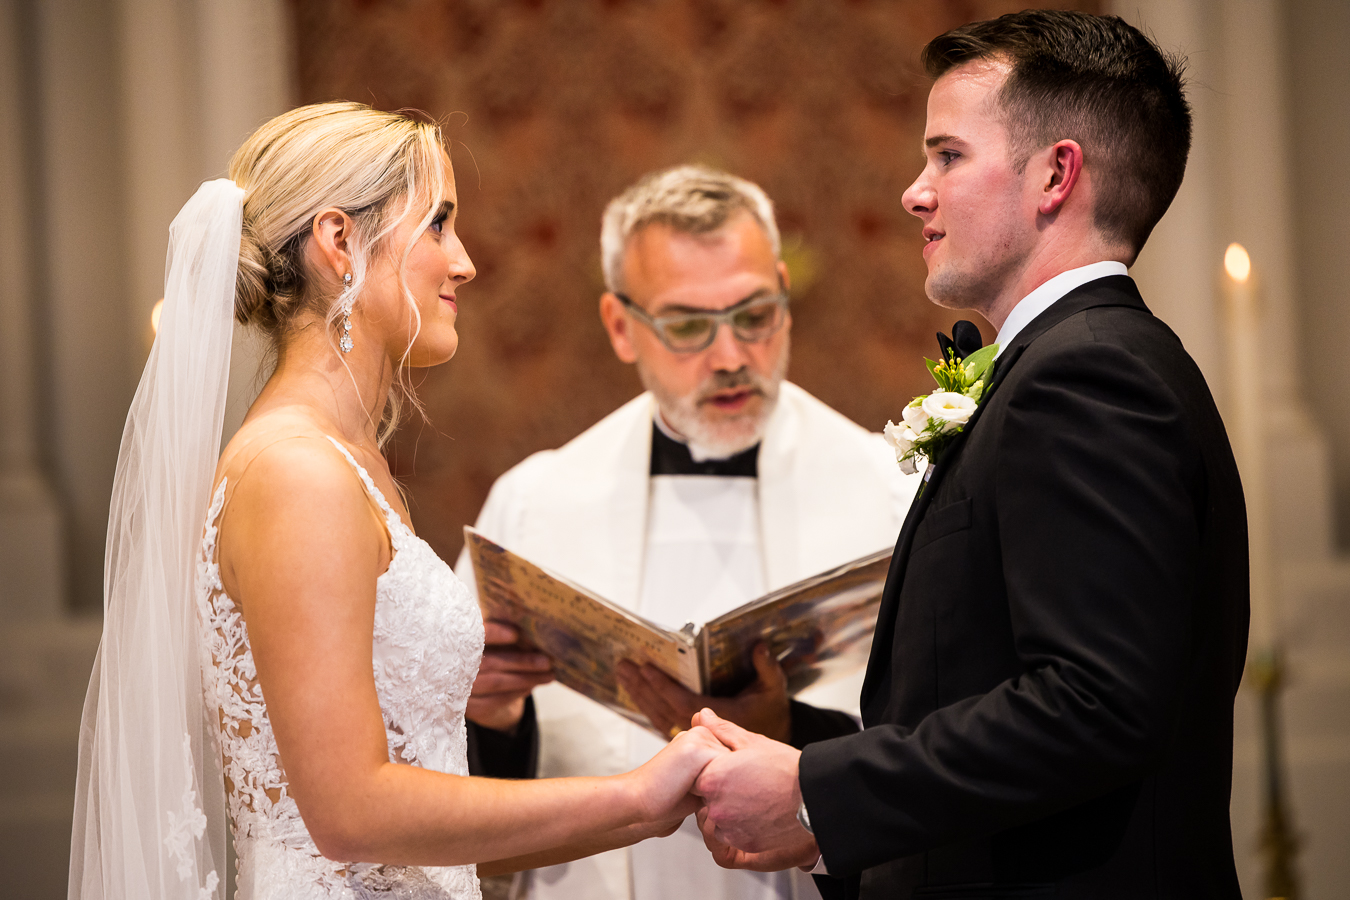 st pauls lutheran church wedding photographer, lisa rhinehart, captures this authentic, special moment between the bride and groom as they hold hands during their wedding ceremony inside of the church